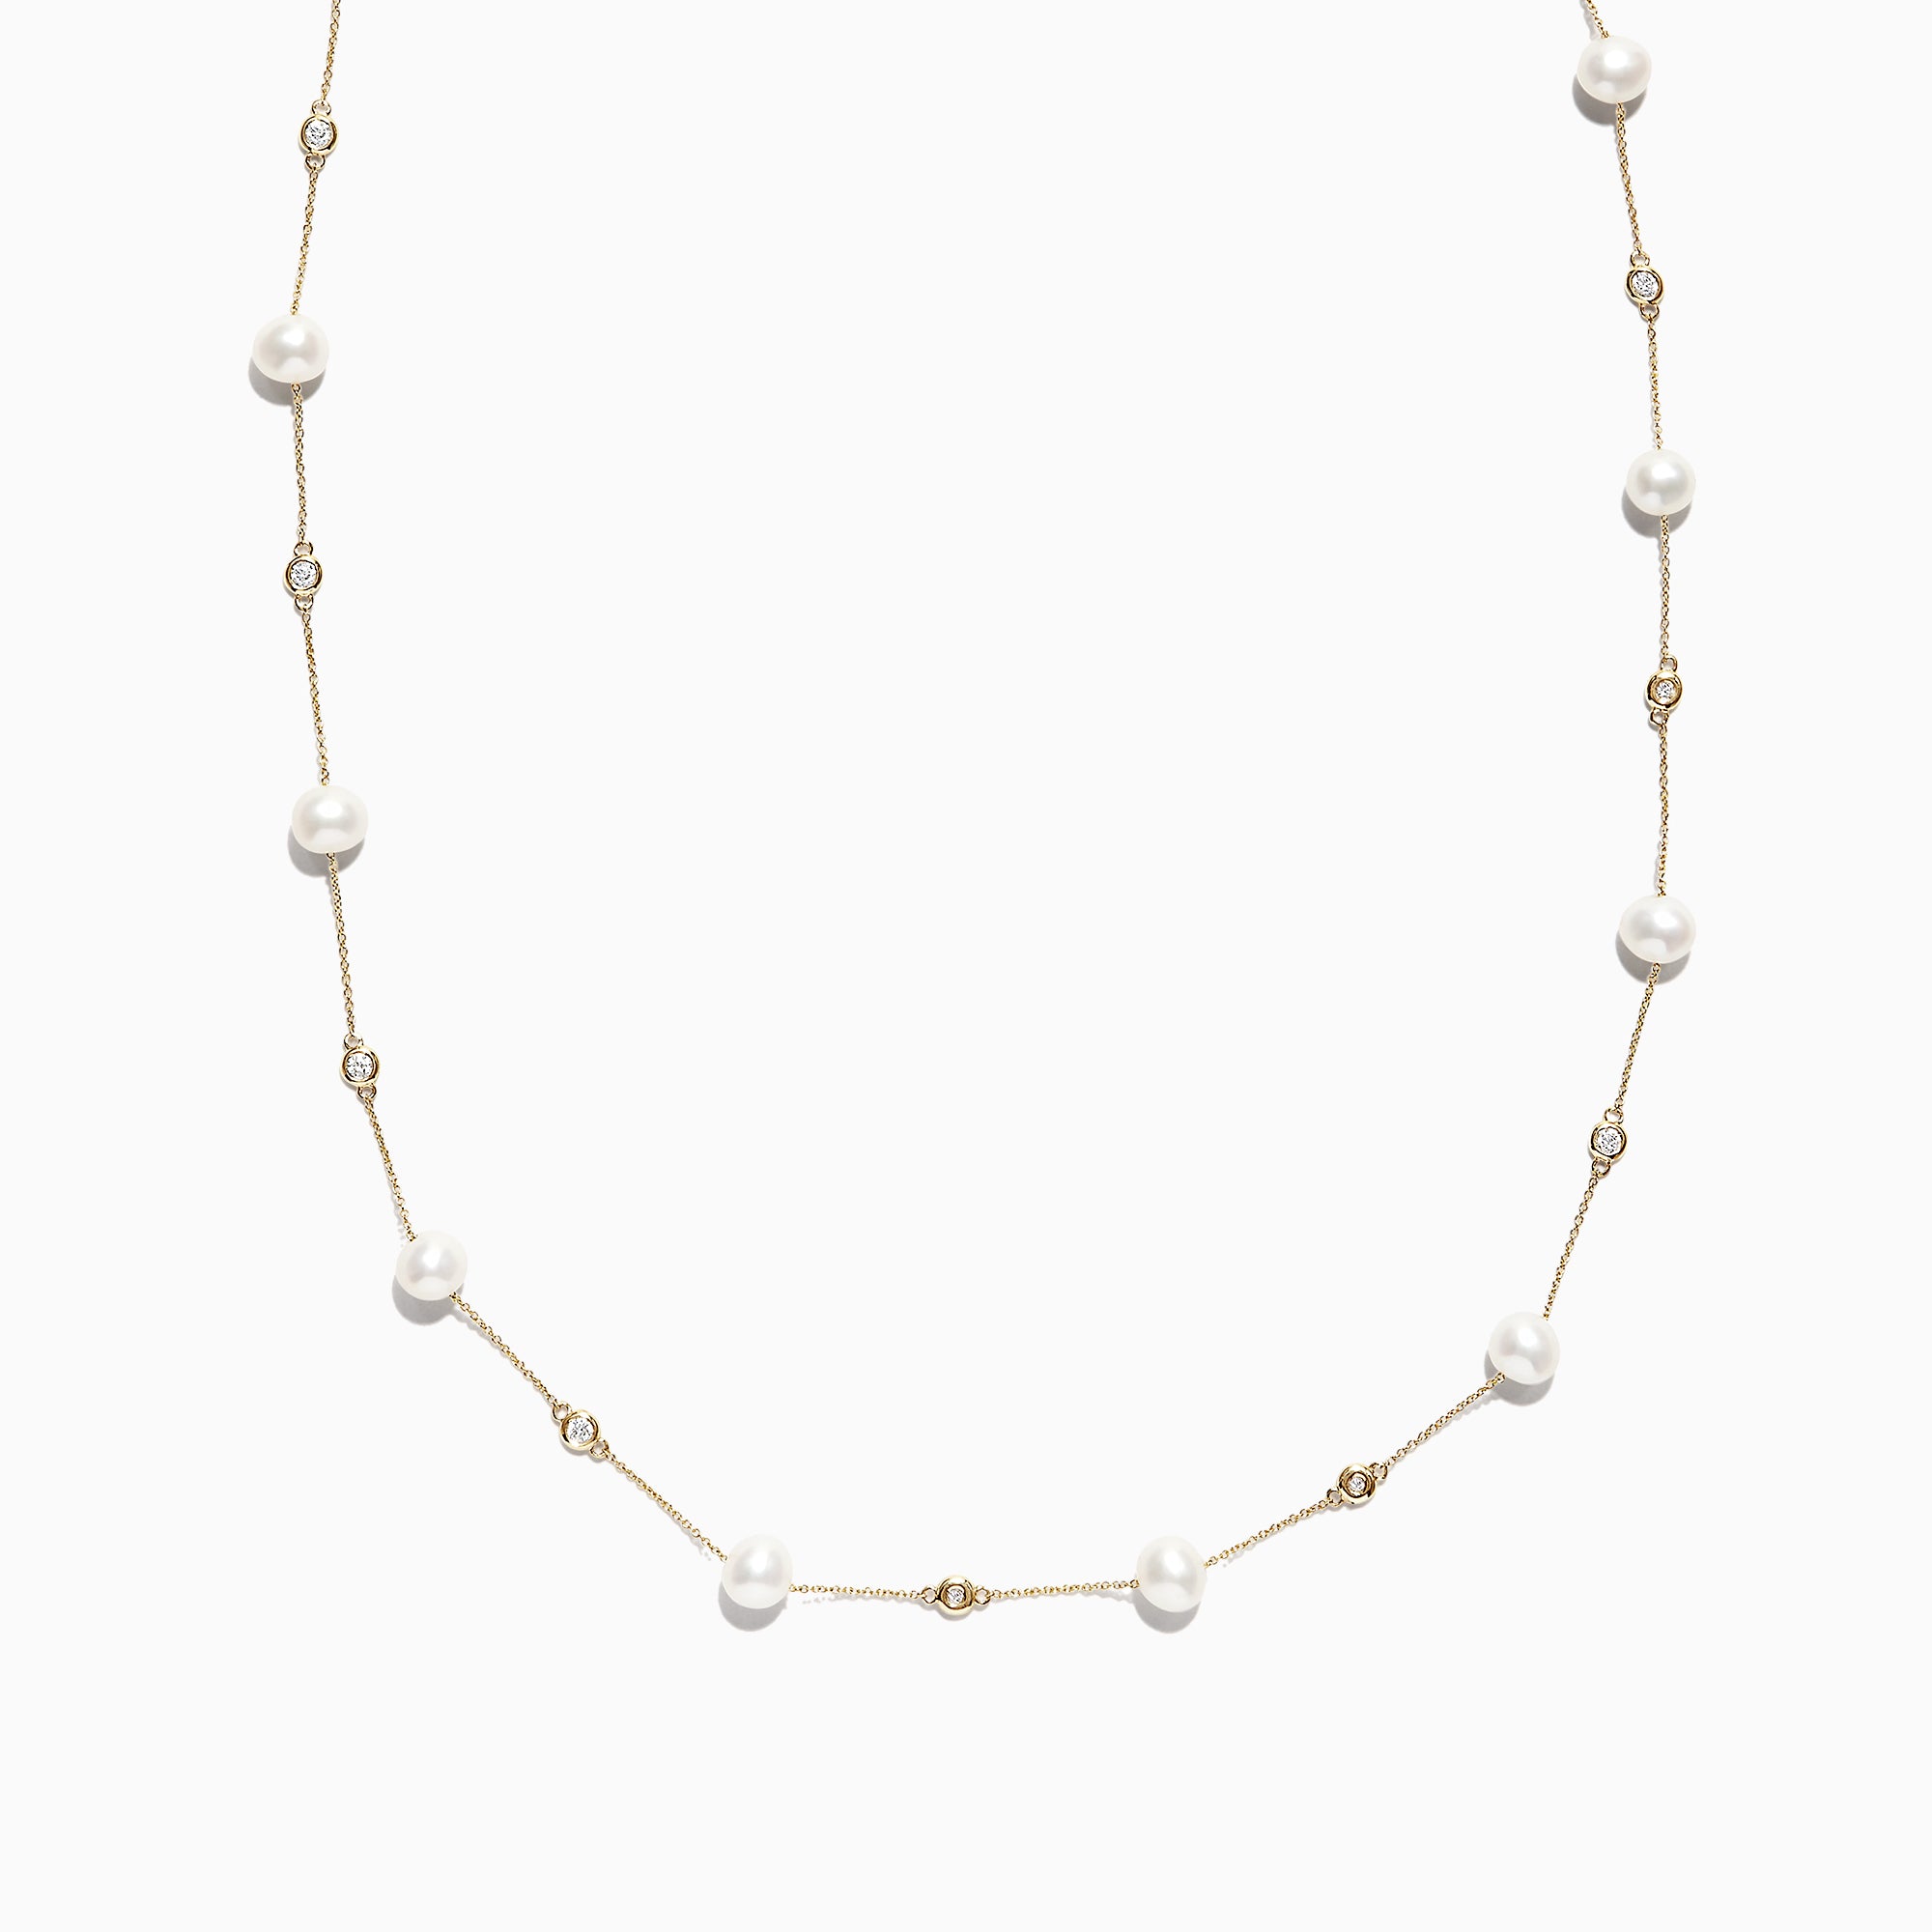 Effy 14K Yellow Gold Diamond and Fresh Water Pearl Necklace, 0.34 TCW